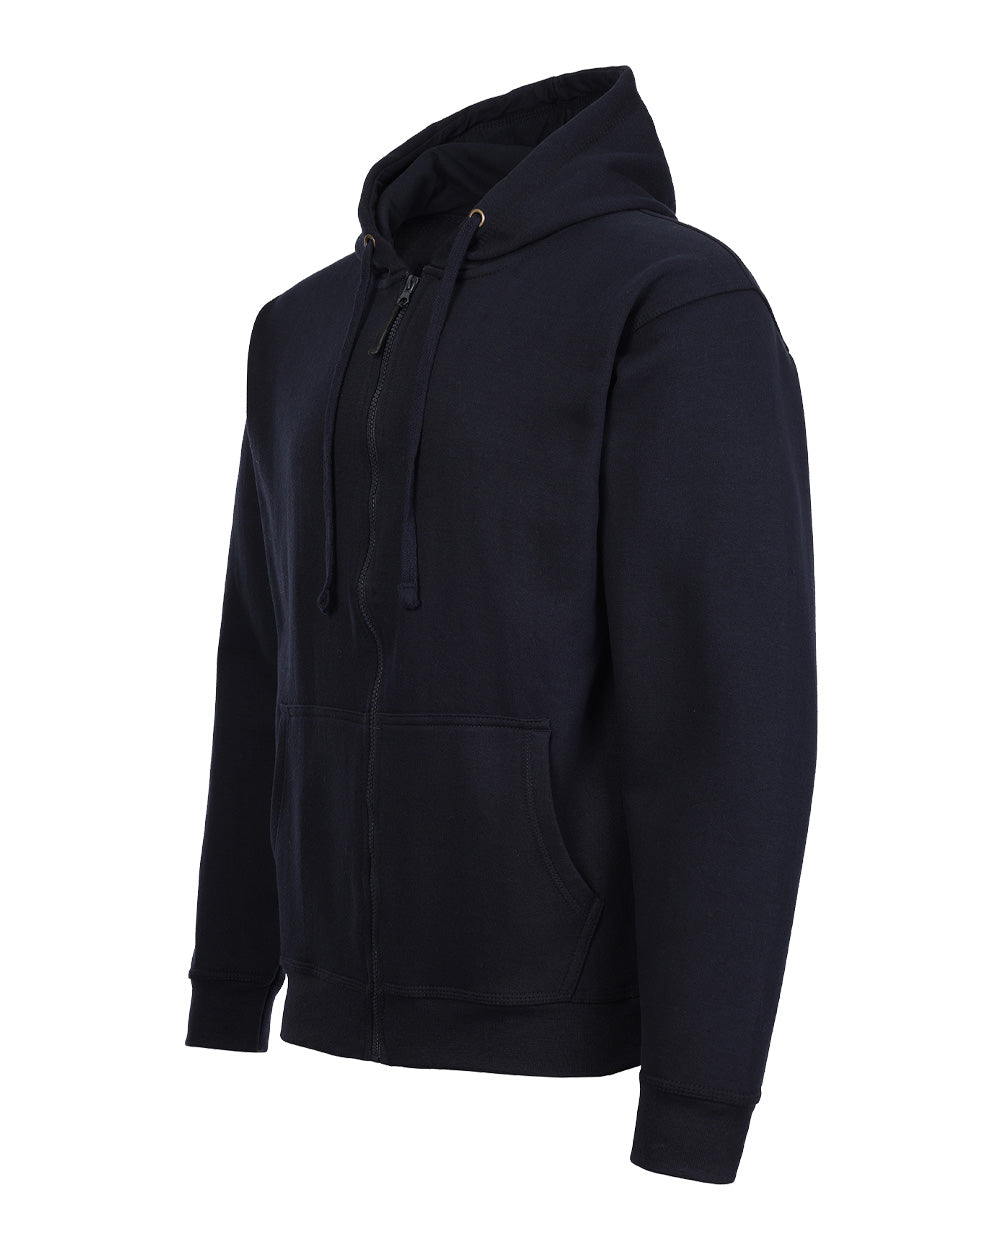 Navy Blue coloured TuffStuff Pro Work Hoodie on White background 